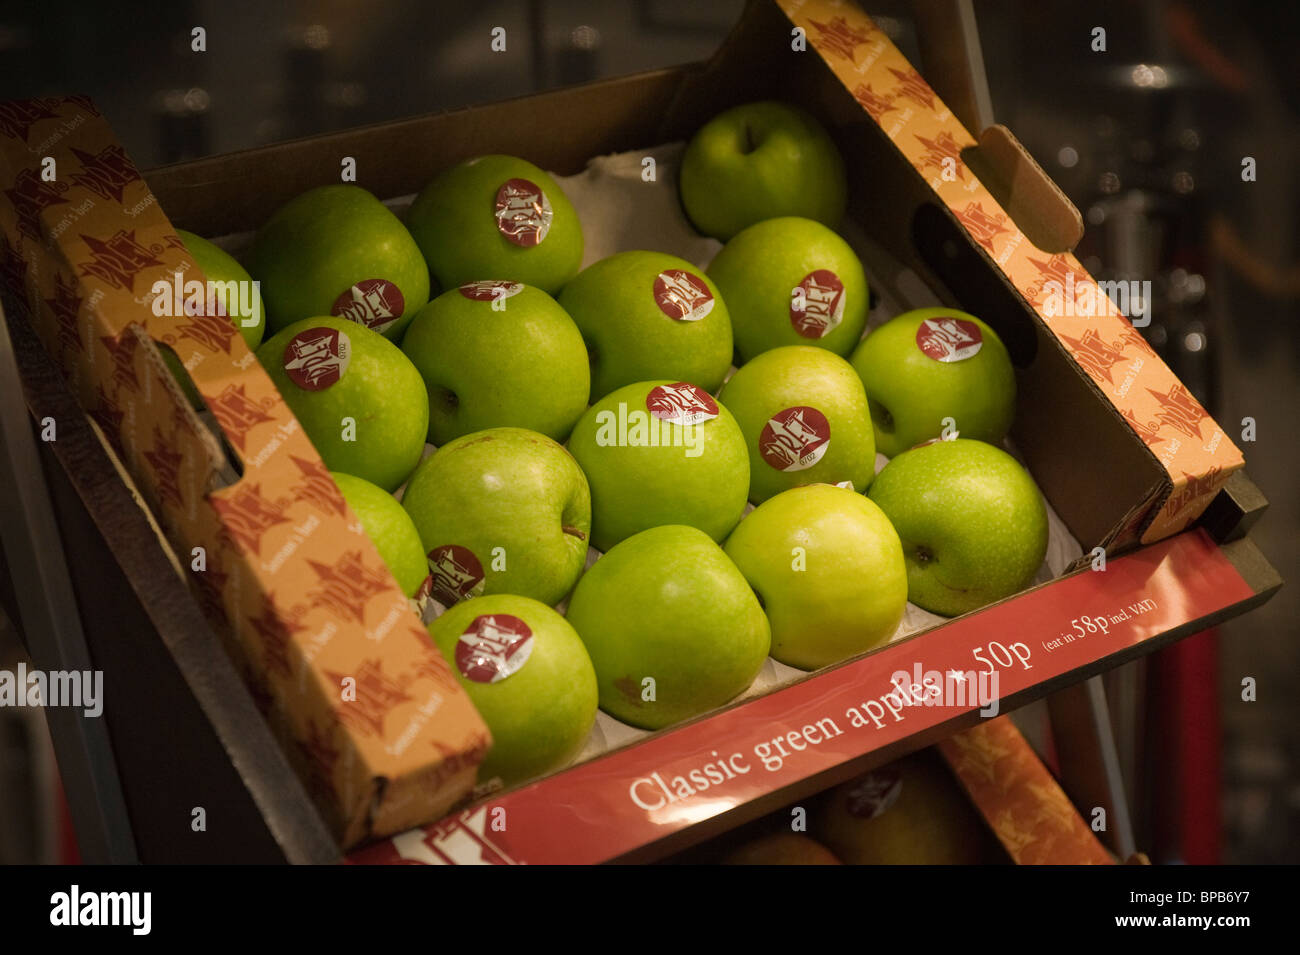 Cardboard box of Granny Smith apples at a Pret A Manger cafe Stock Photo